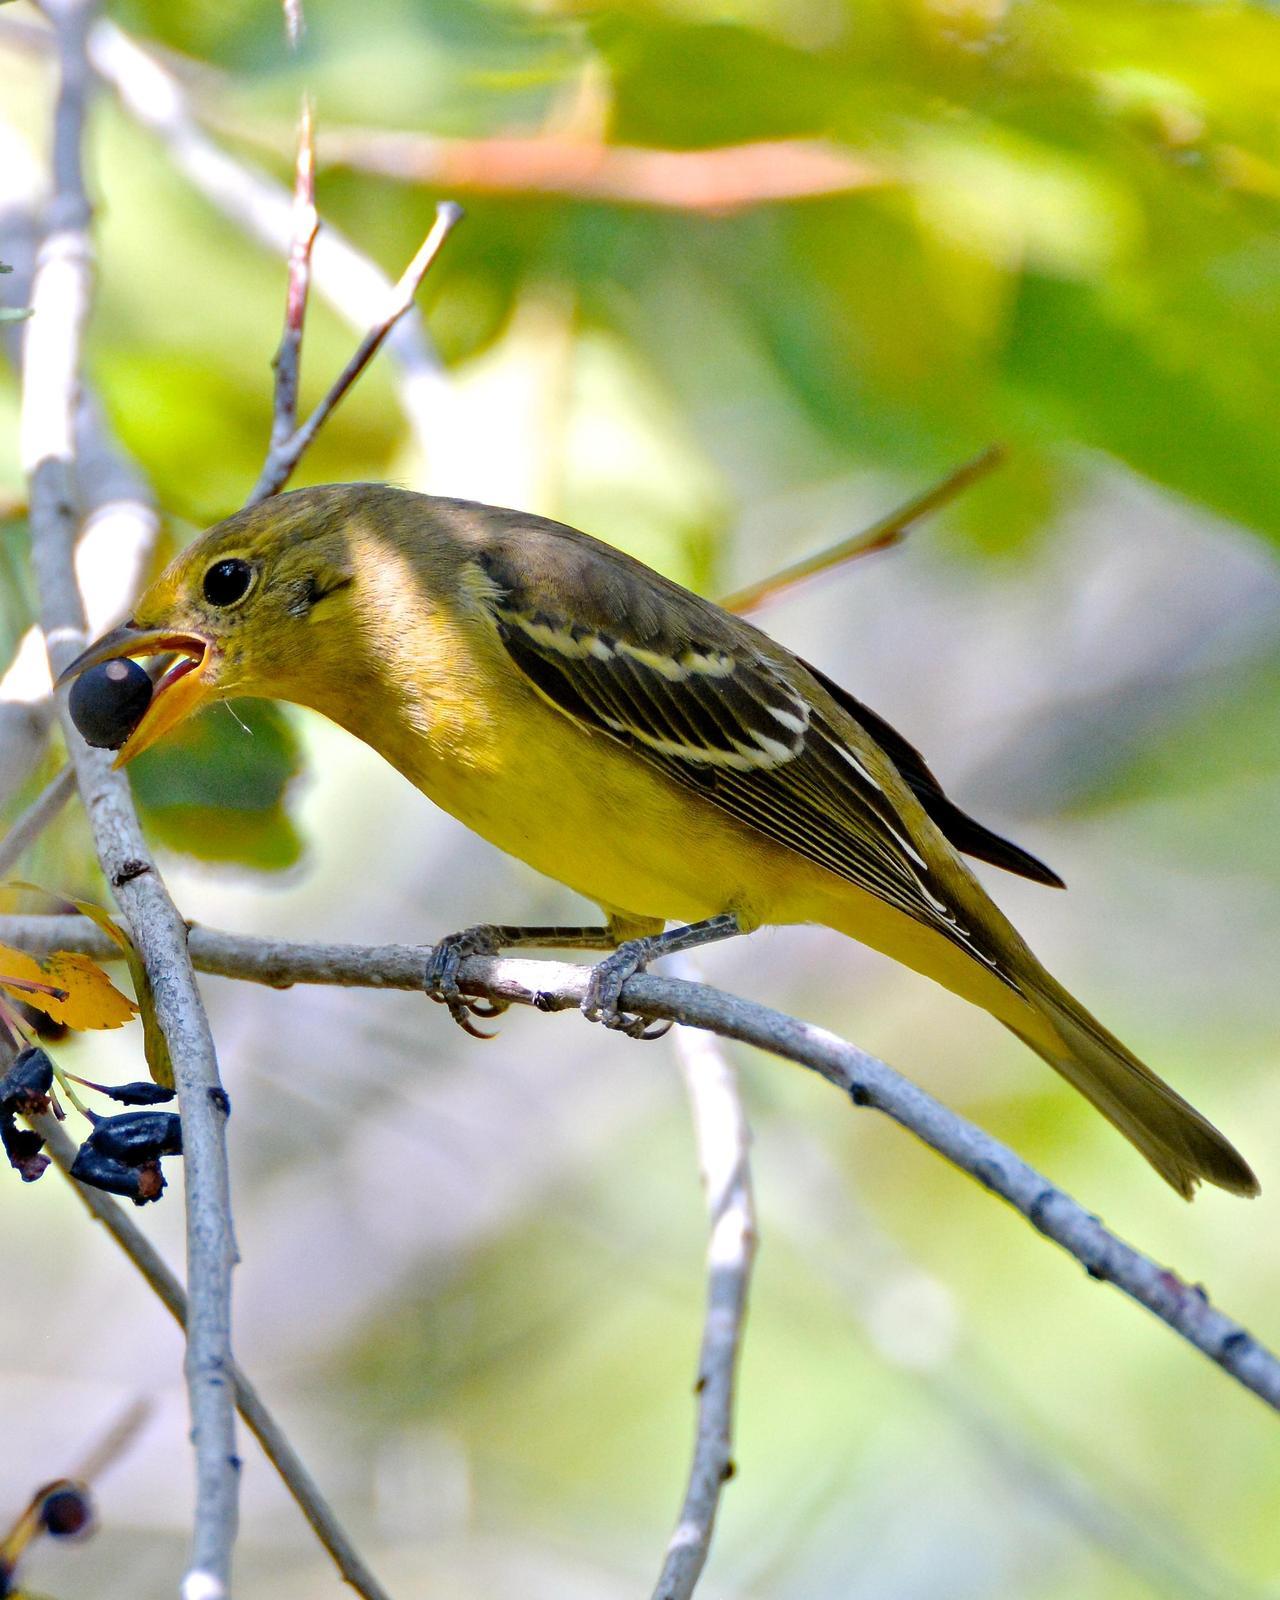 Western Tanager Photo by Gerald Friesen